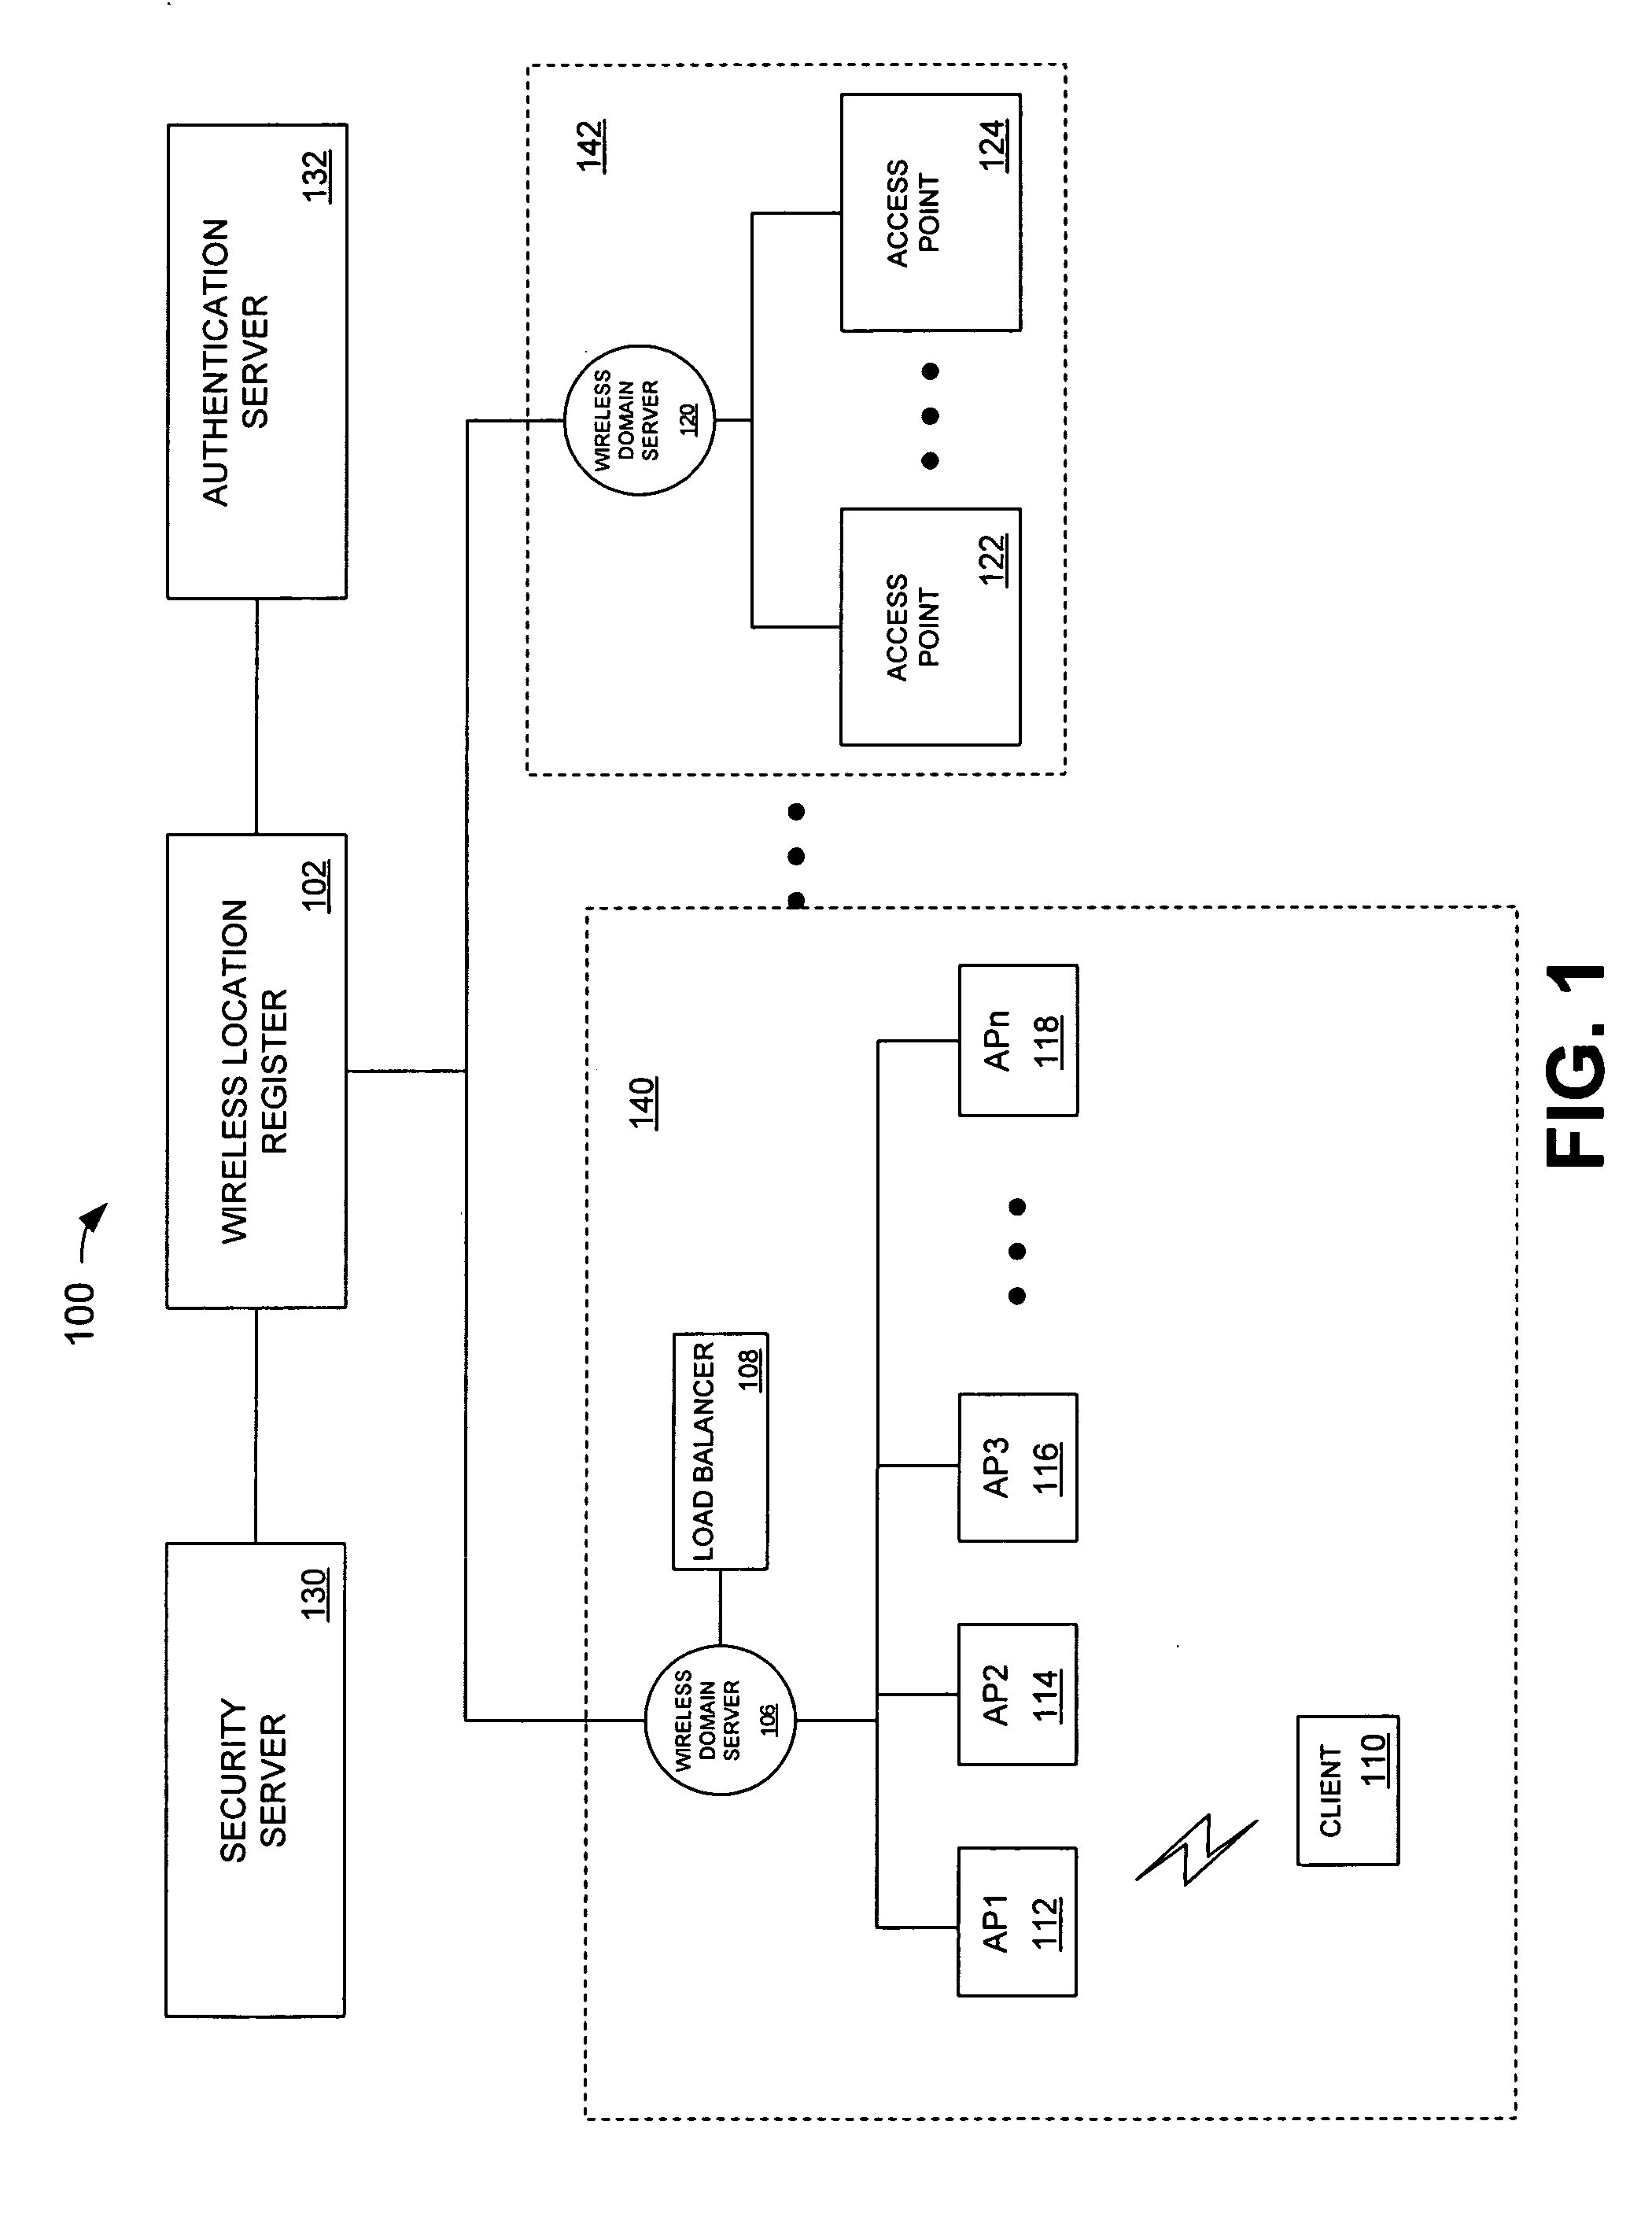 Method and system for filtered pre-authentication and roaming